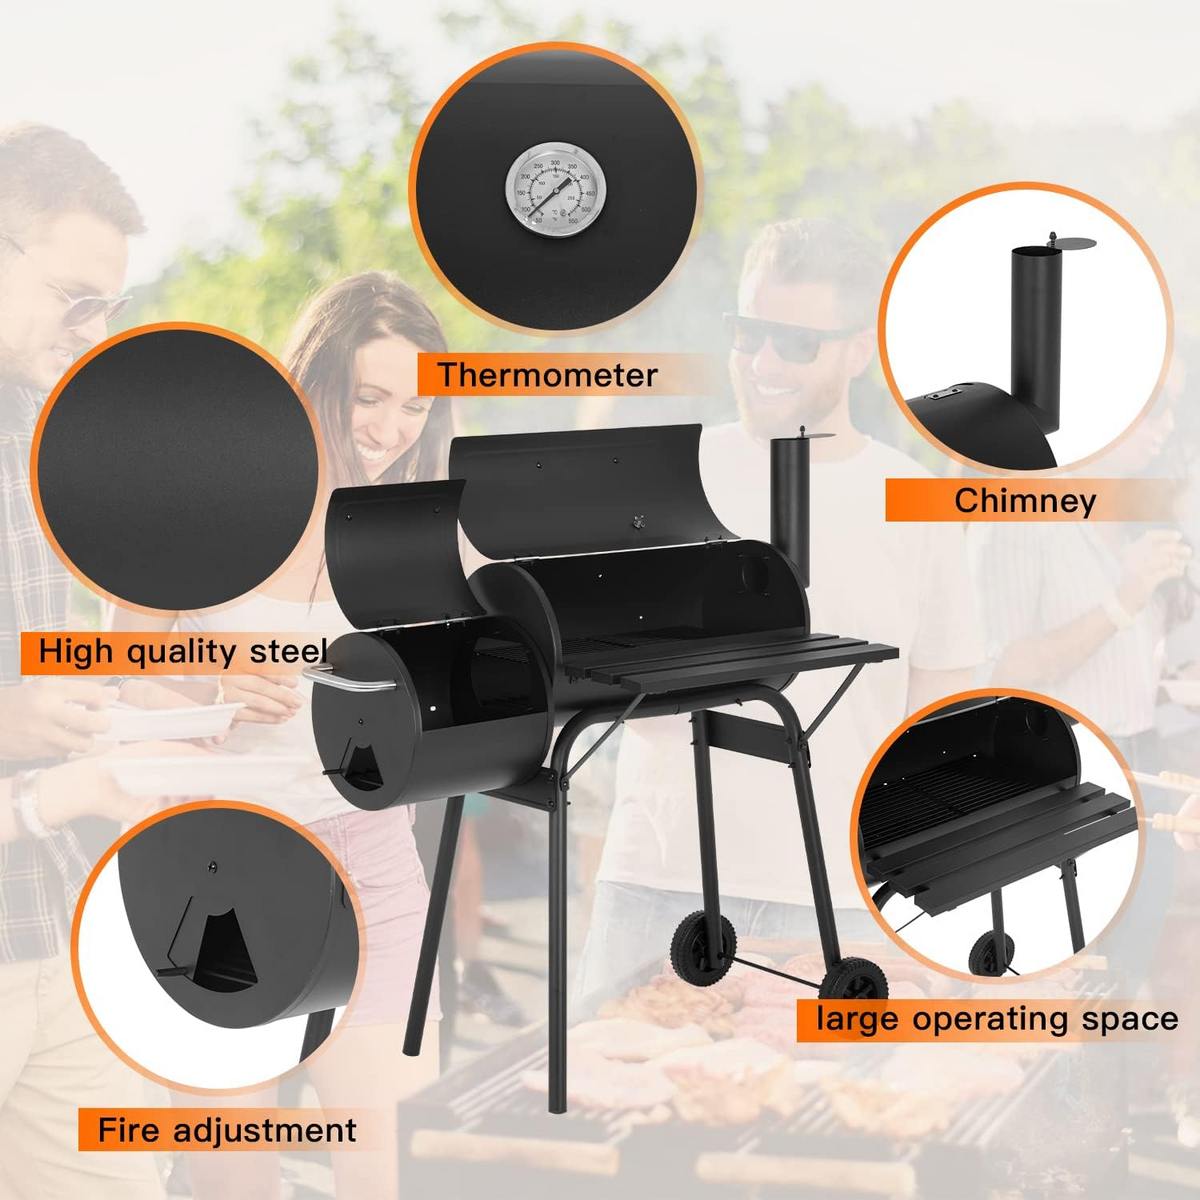 43-inch Charcoal Outdoor BBQ Grill - Portable Camping Grill for 6-10 People, Offset Smoker, Braised Roast, Patio and Backyard Picnic Grill - Barbecue Whizz...Watch My Smoke!